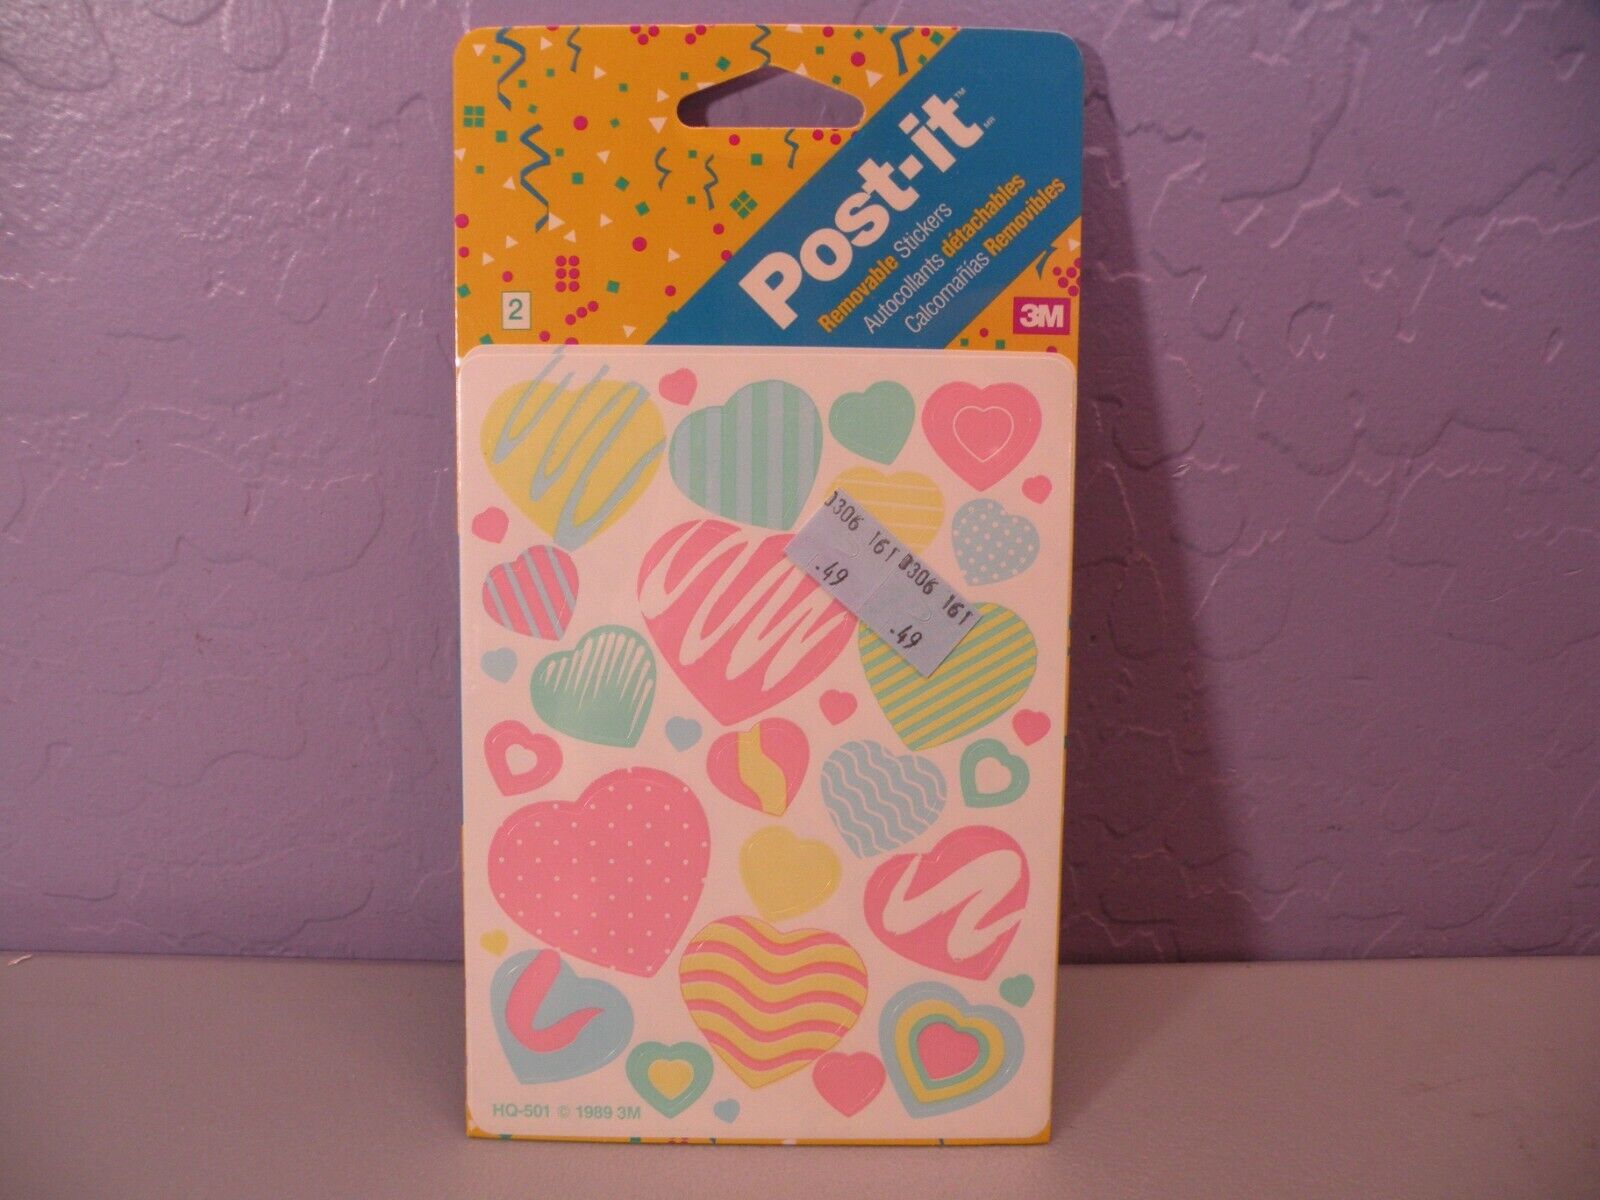 1989 VTG POST IT 3M Removable Heart STICKERS 2 Sheets new sealed Made In USA